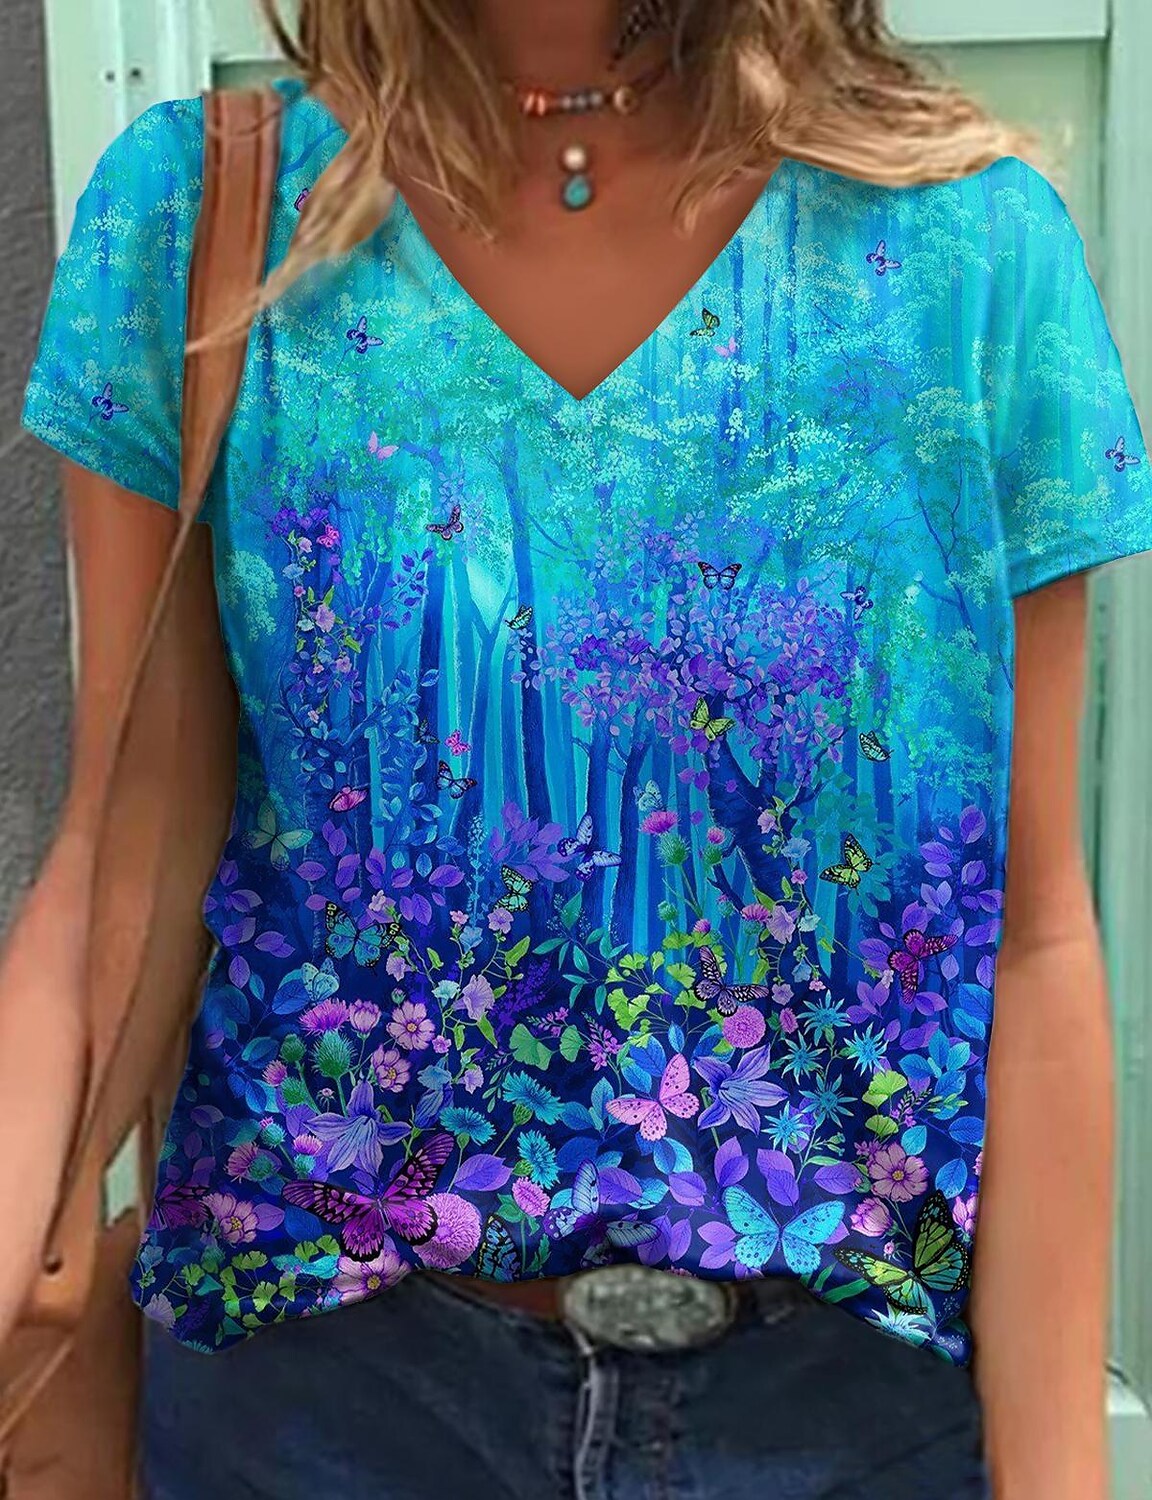 Women's Floral Theme Painting T shirt Floral Graphic Print V Neck Basic Tops